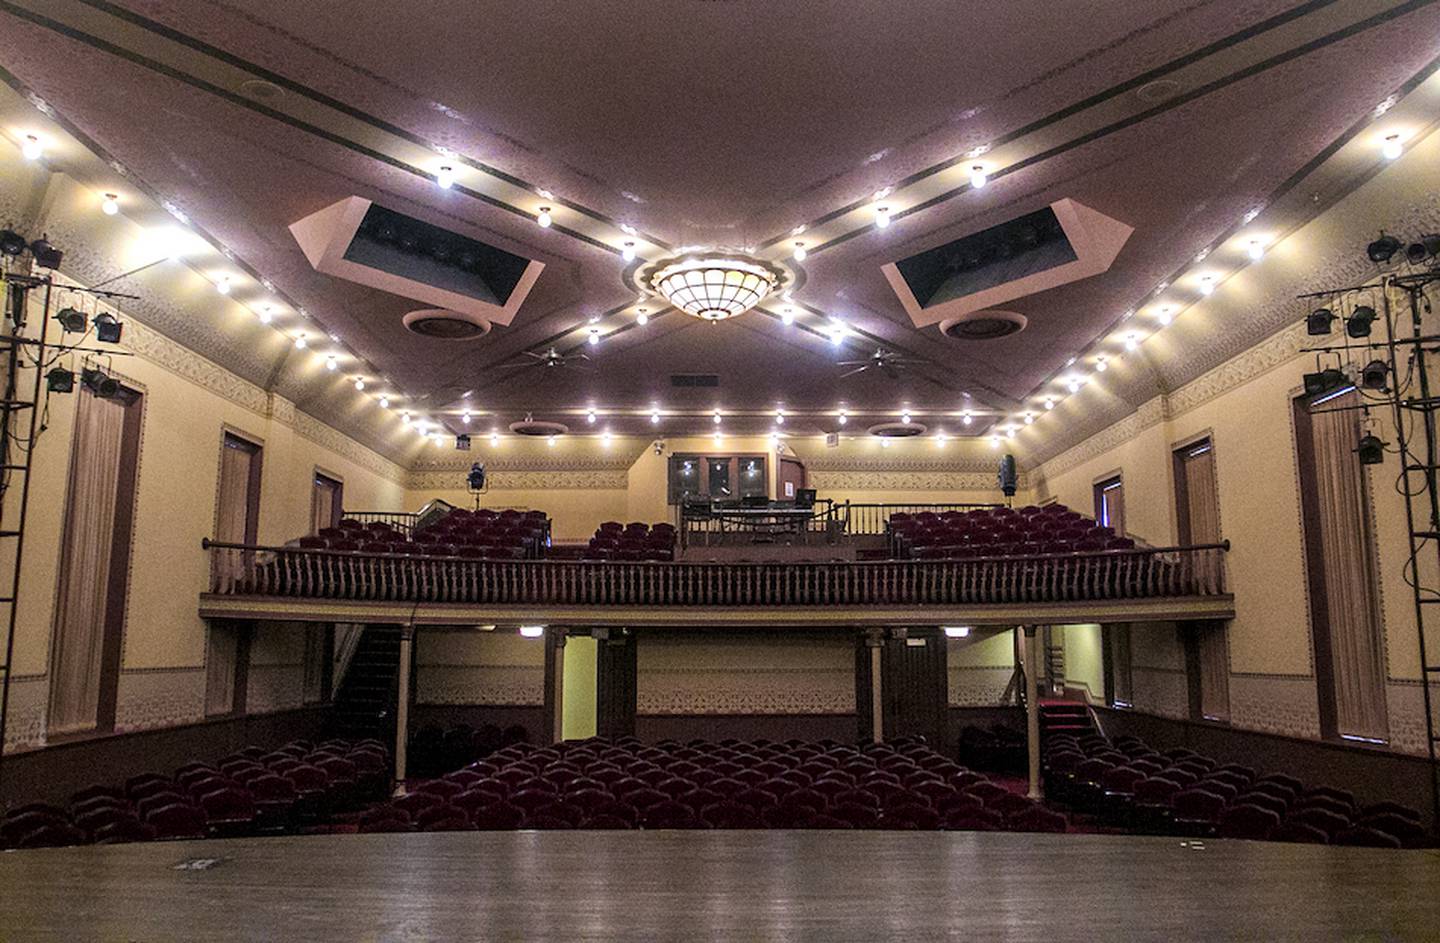 The 310 seat auditorium of the Sandwich Opera House is viewed from the stage Tuesday. The venue was built in 1878 and most recently renovated in 1983.